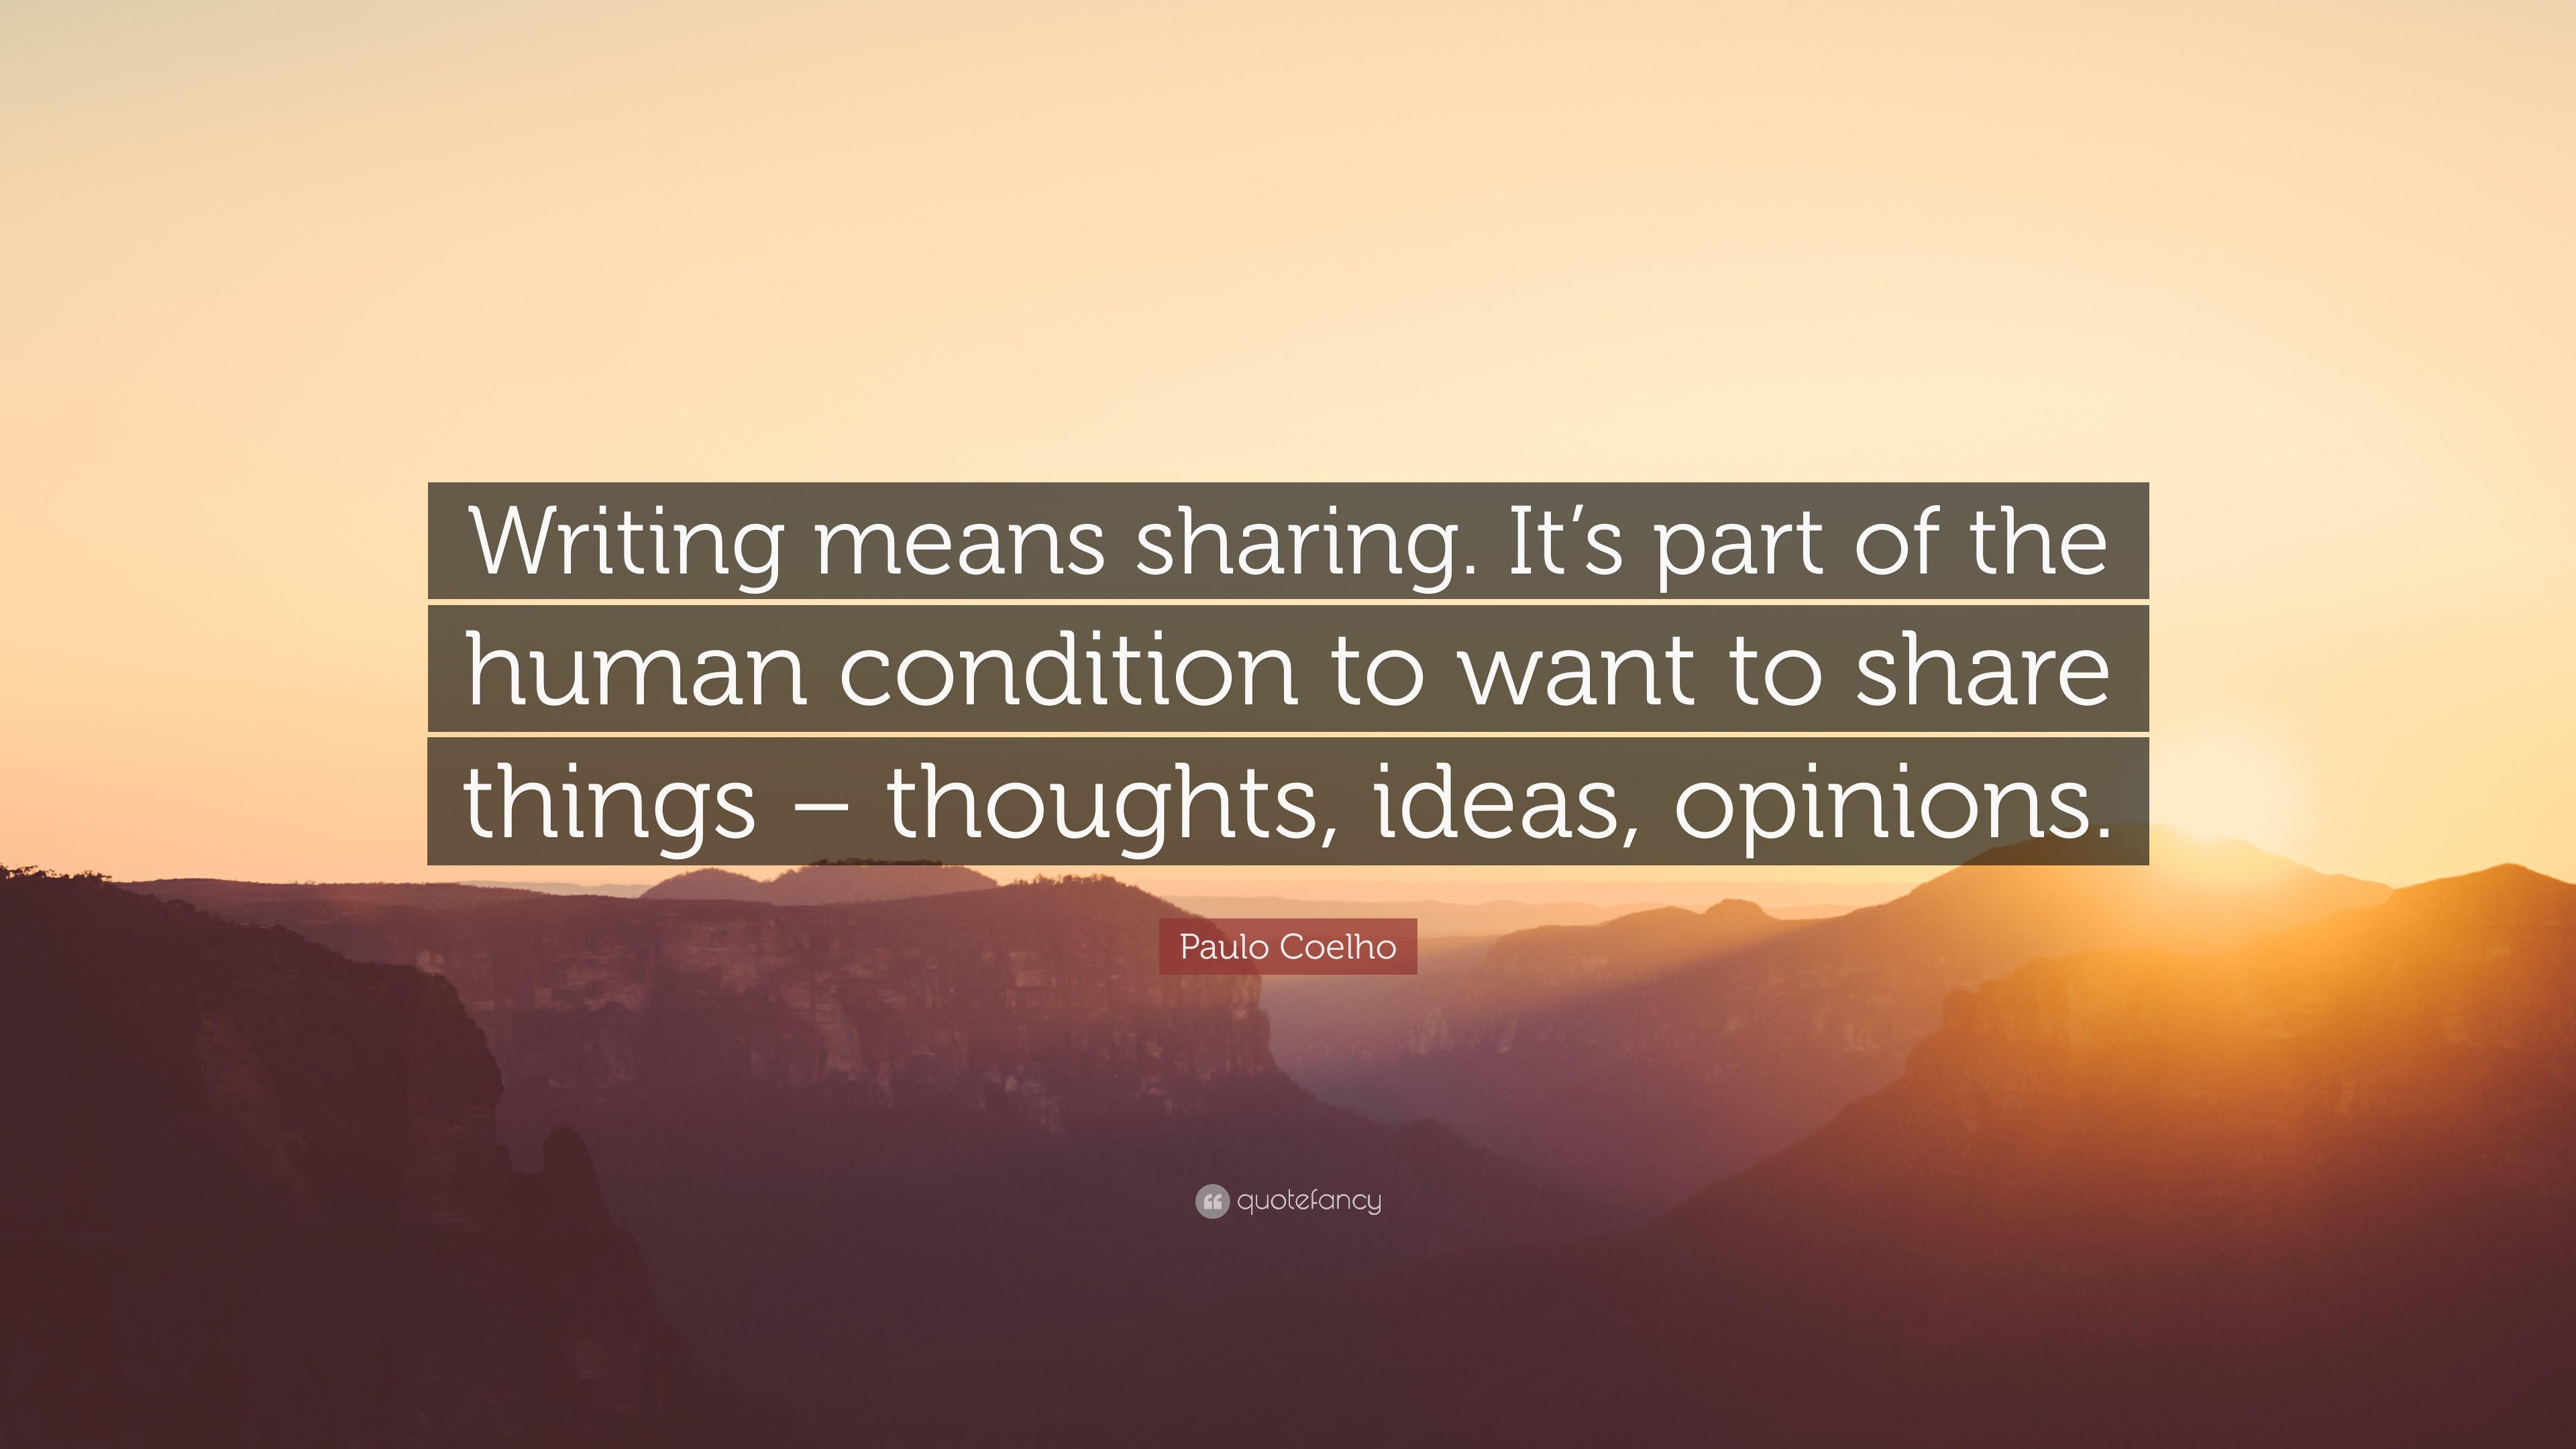 Paulo Coelho Quote: “Writing means sharing. It's part of the human  condition to want to share things – thoughts, ideas, opinions.” (7  wallpapers) - Quotefancy